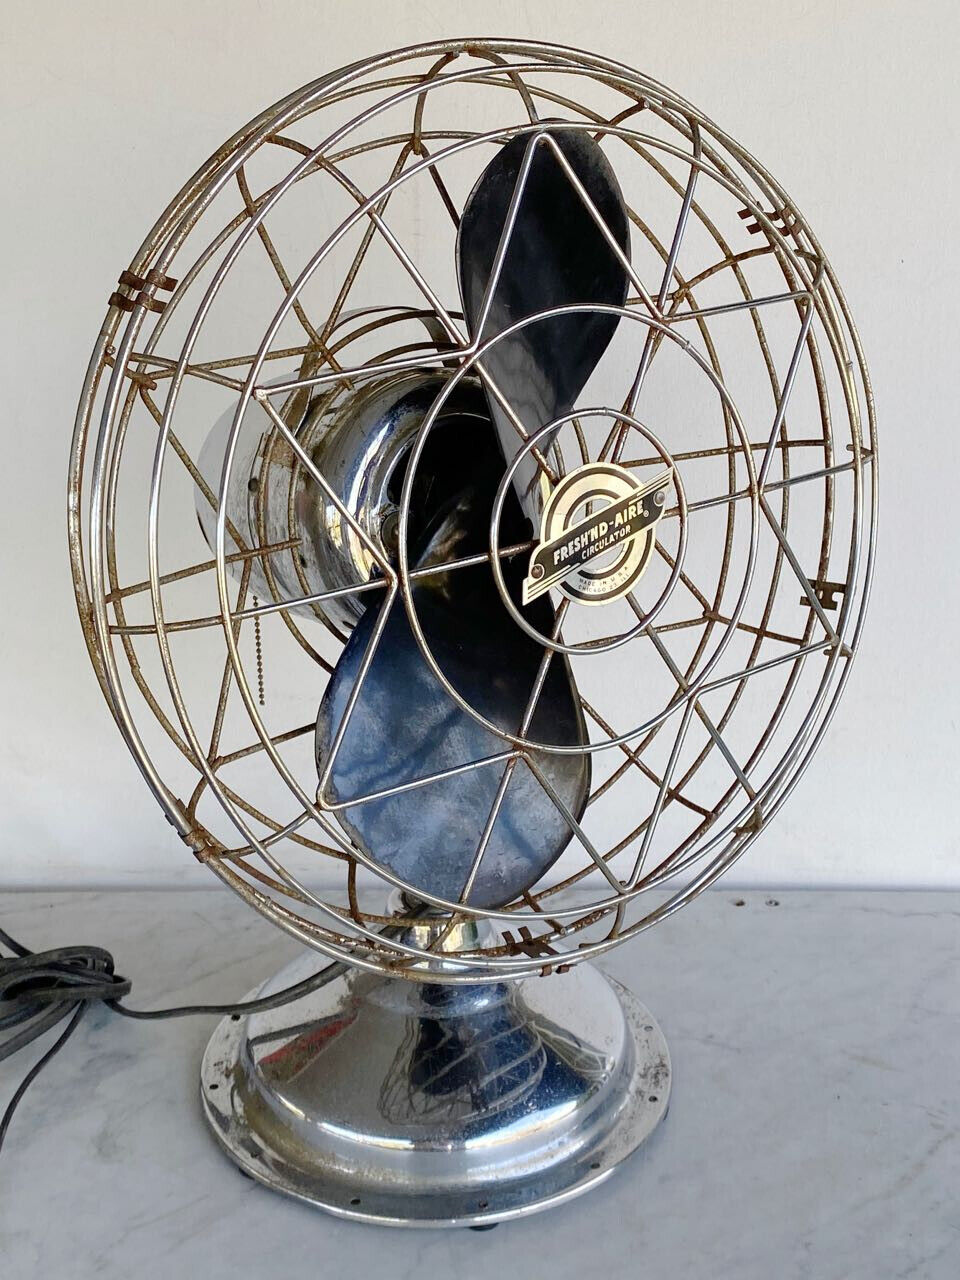 Vintage FRESH’ND AIRE Circulator Table Fan. Art Deco Style 3 Speeds. Model 1400